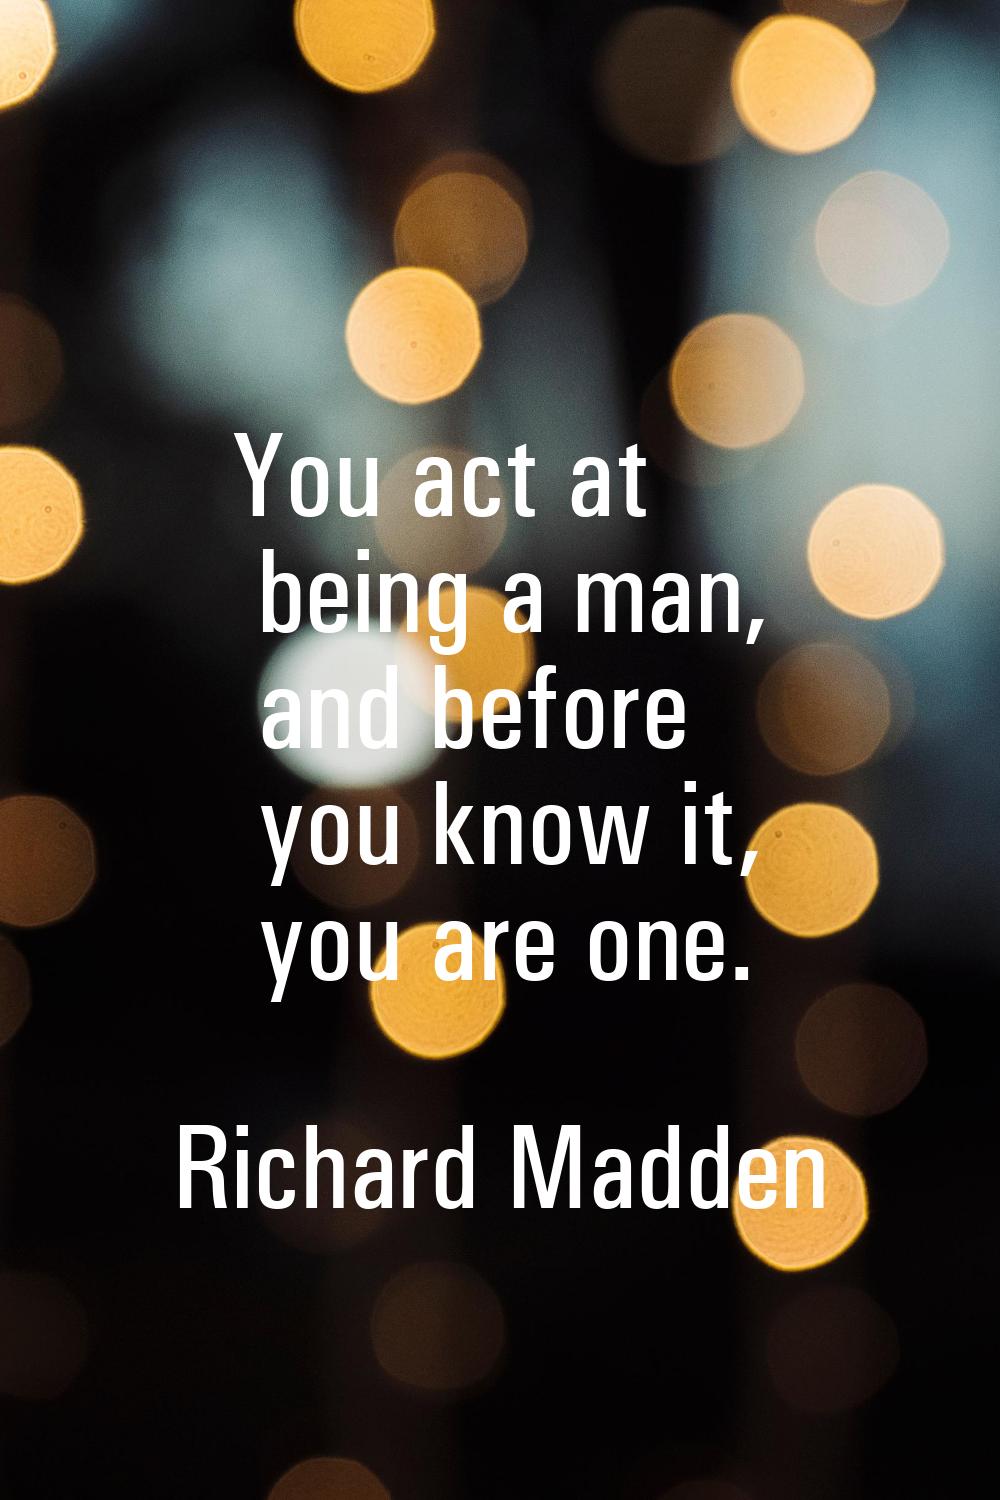 You act at being a man, and before you know it, you are one.